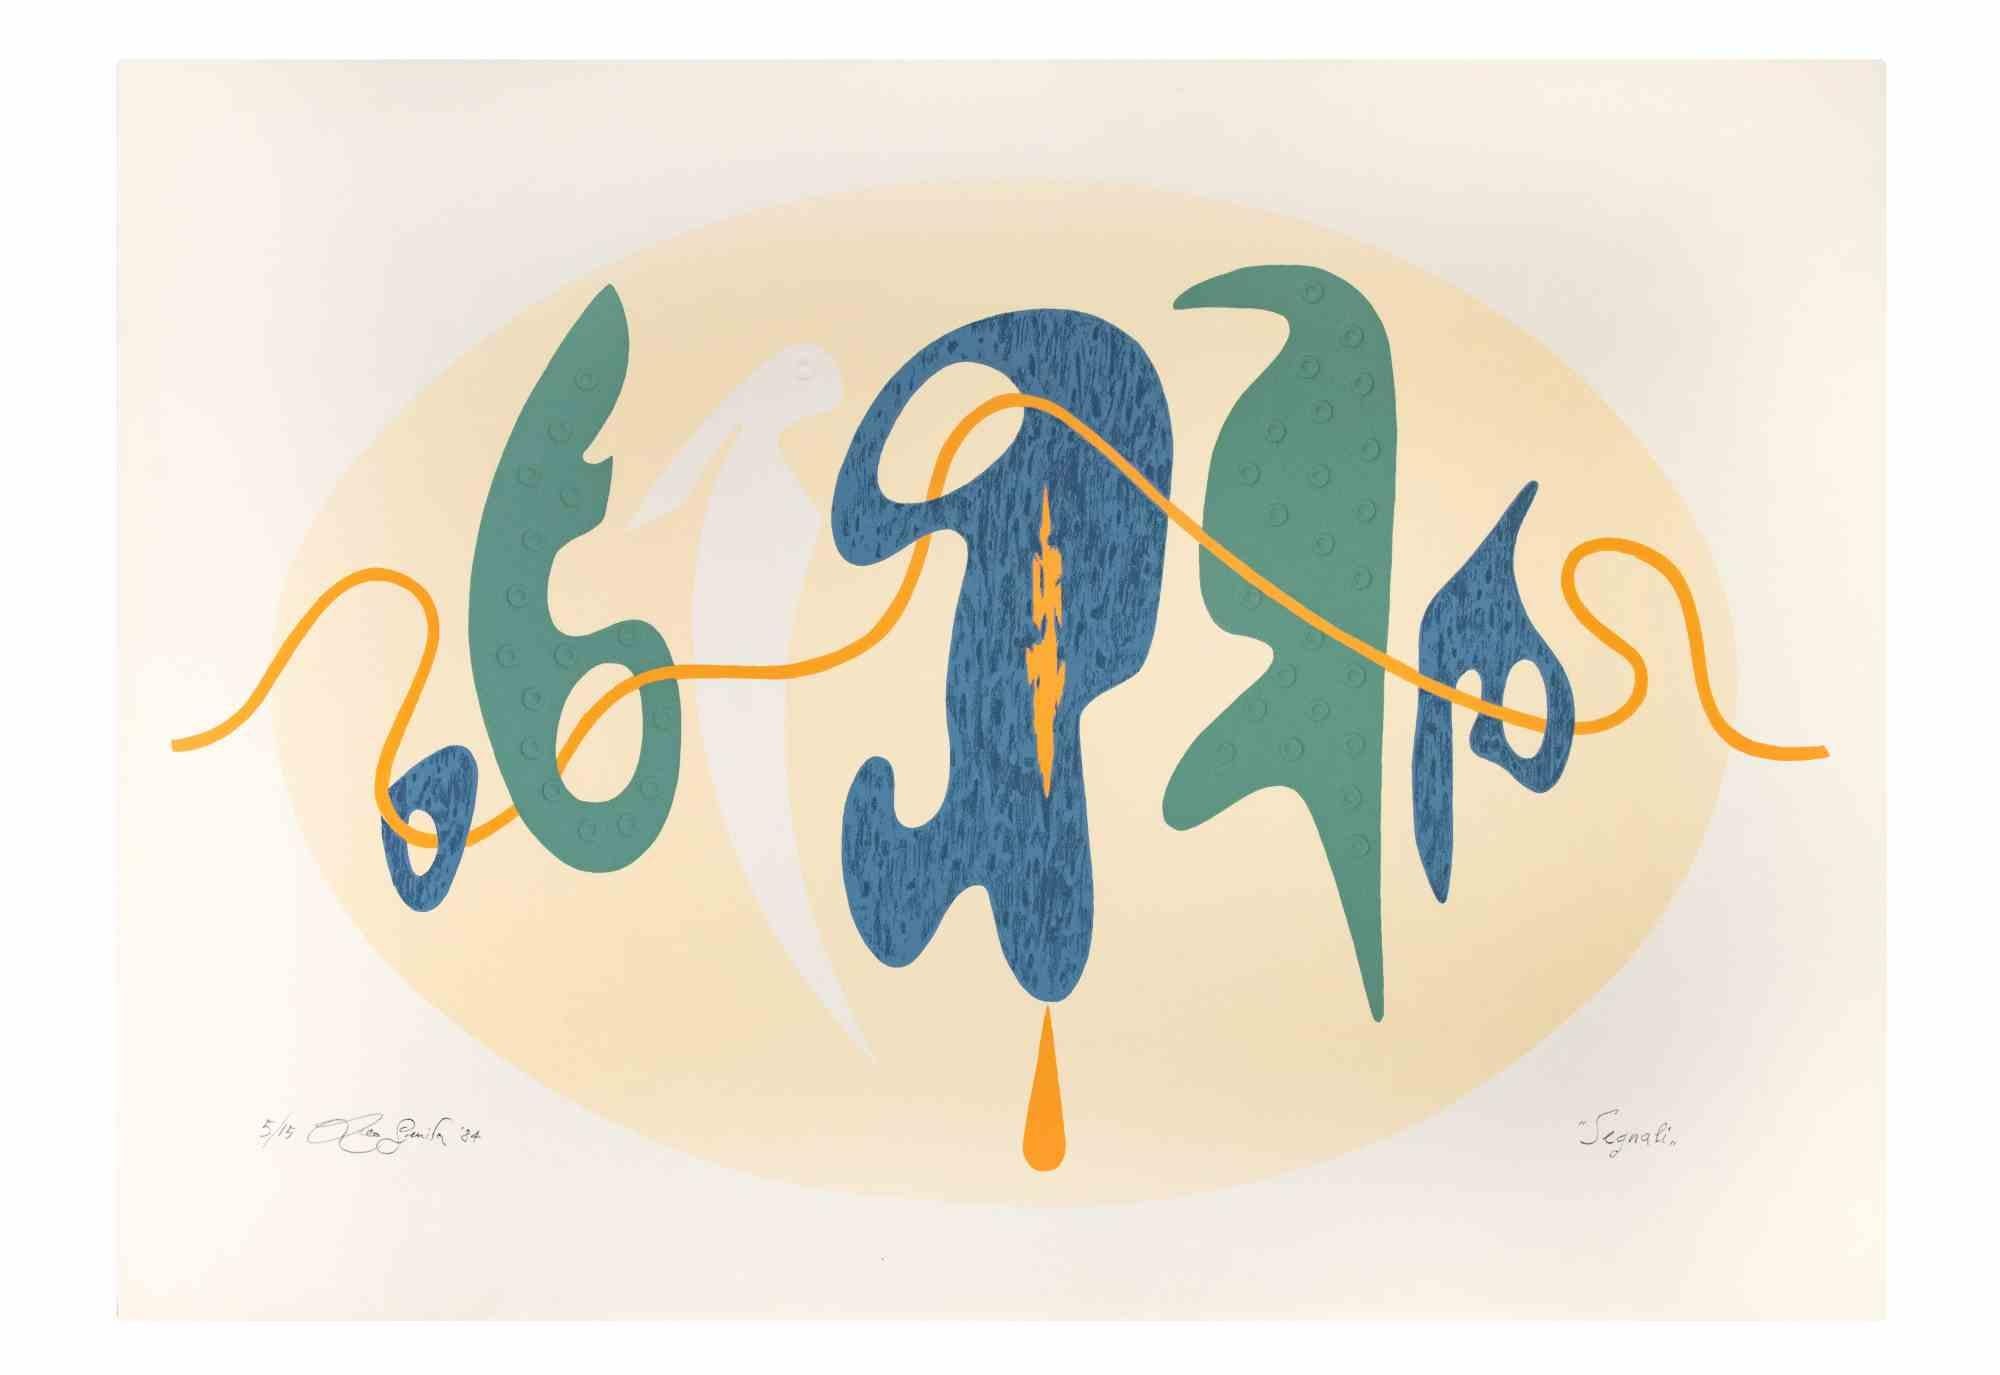 Segnali (Signals) is an artwork realized in 1984 by the Italian Contemporary artist  Leo Guida  (1992 - 2017). 

Screen print on cardboard  Hand-signed on the lower left in pencil and dated. Titled on the right margin. Numbered on the lower left,